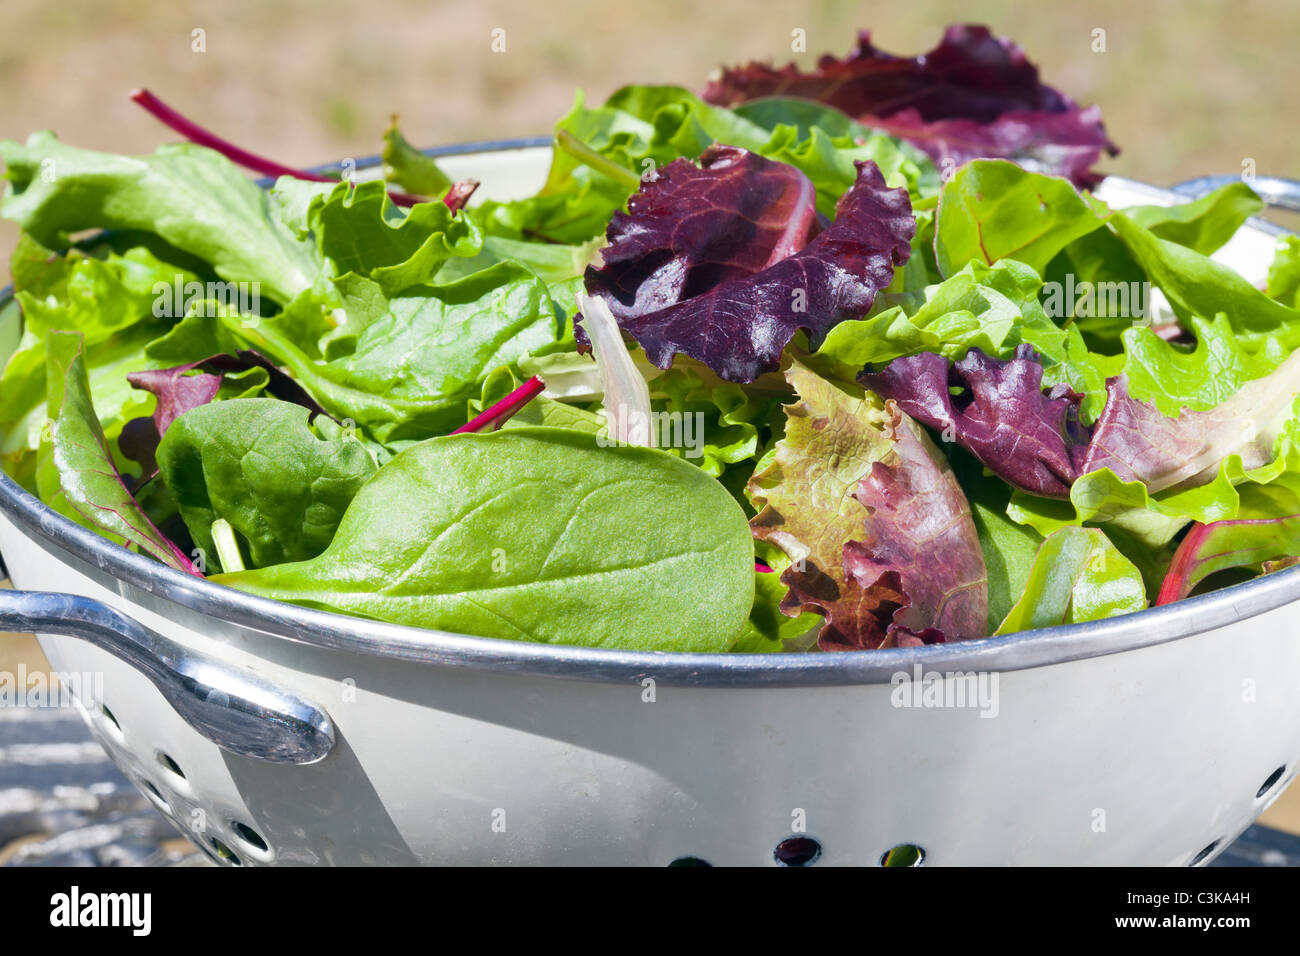 Mixed lettuce leaves in colander Stock Photo